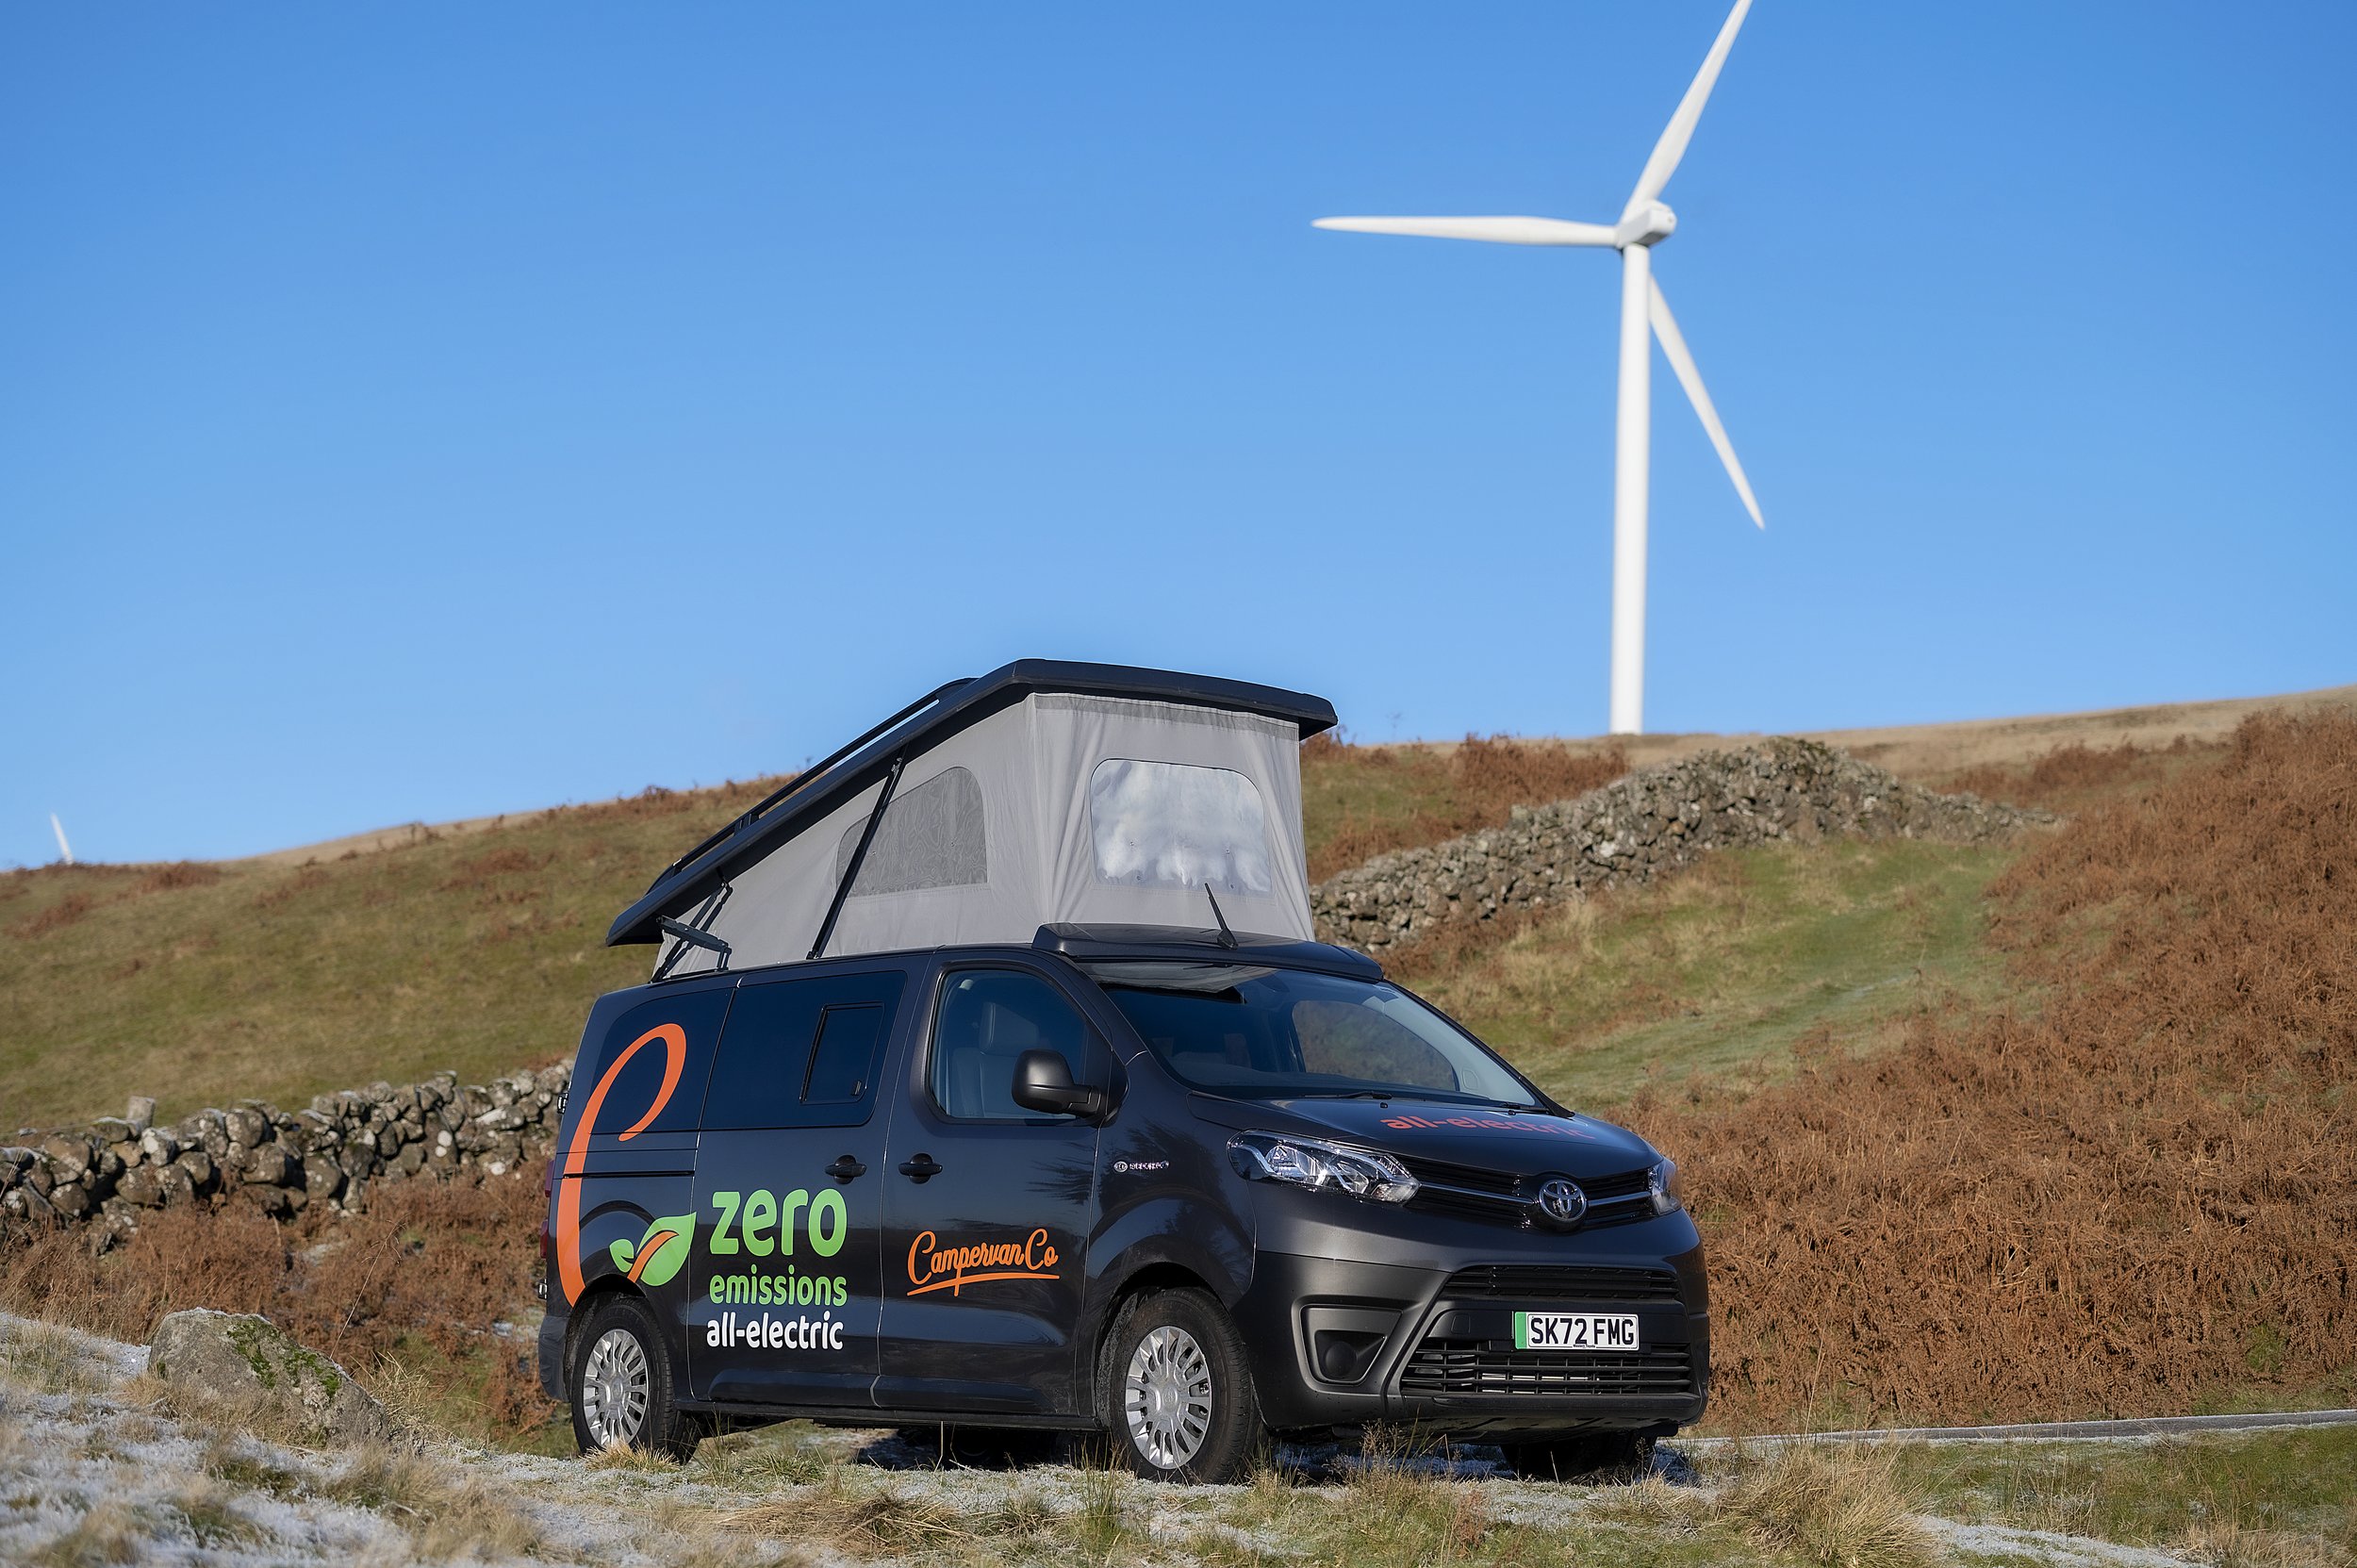 Renewable energy can heat, cook and drive your zero-emissions Revolution. Charge at home and drive for under 3p per mile!